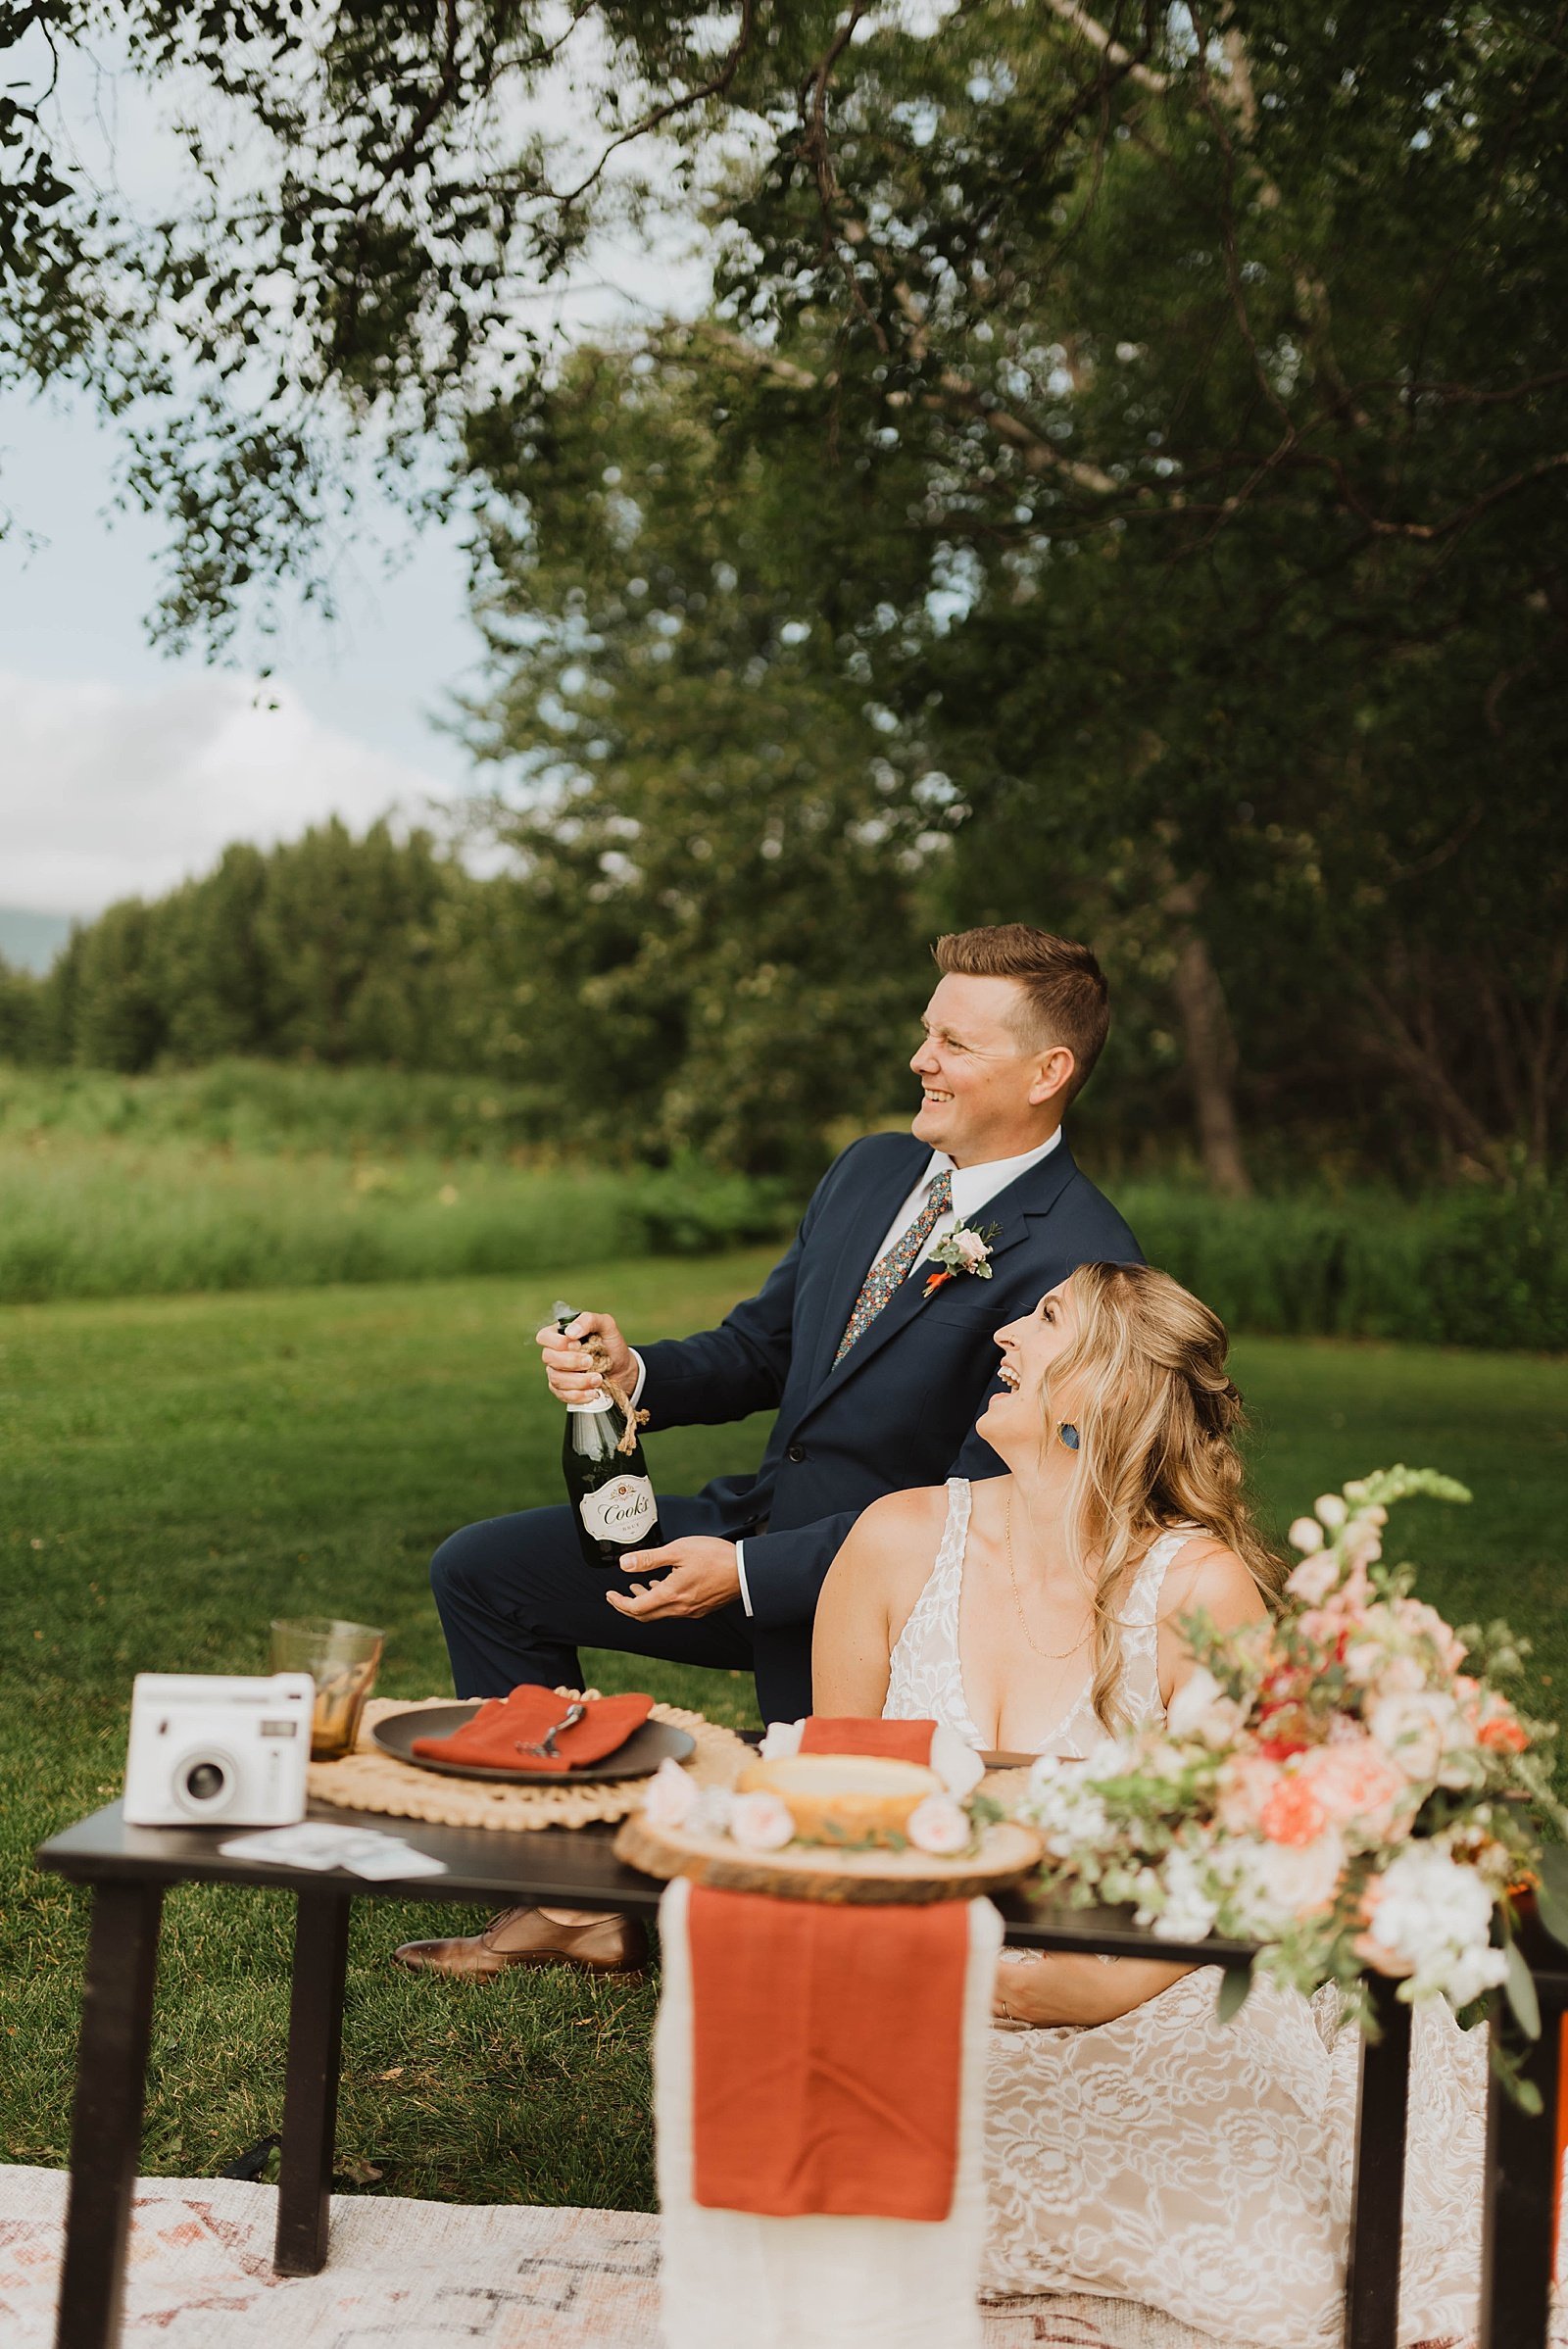  Groom popping champagne at styled wedding picnic for their 10 year anniversary.  